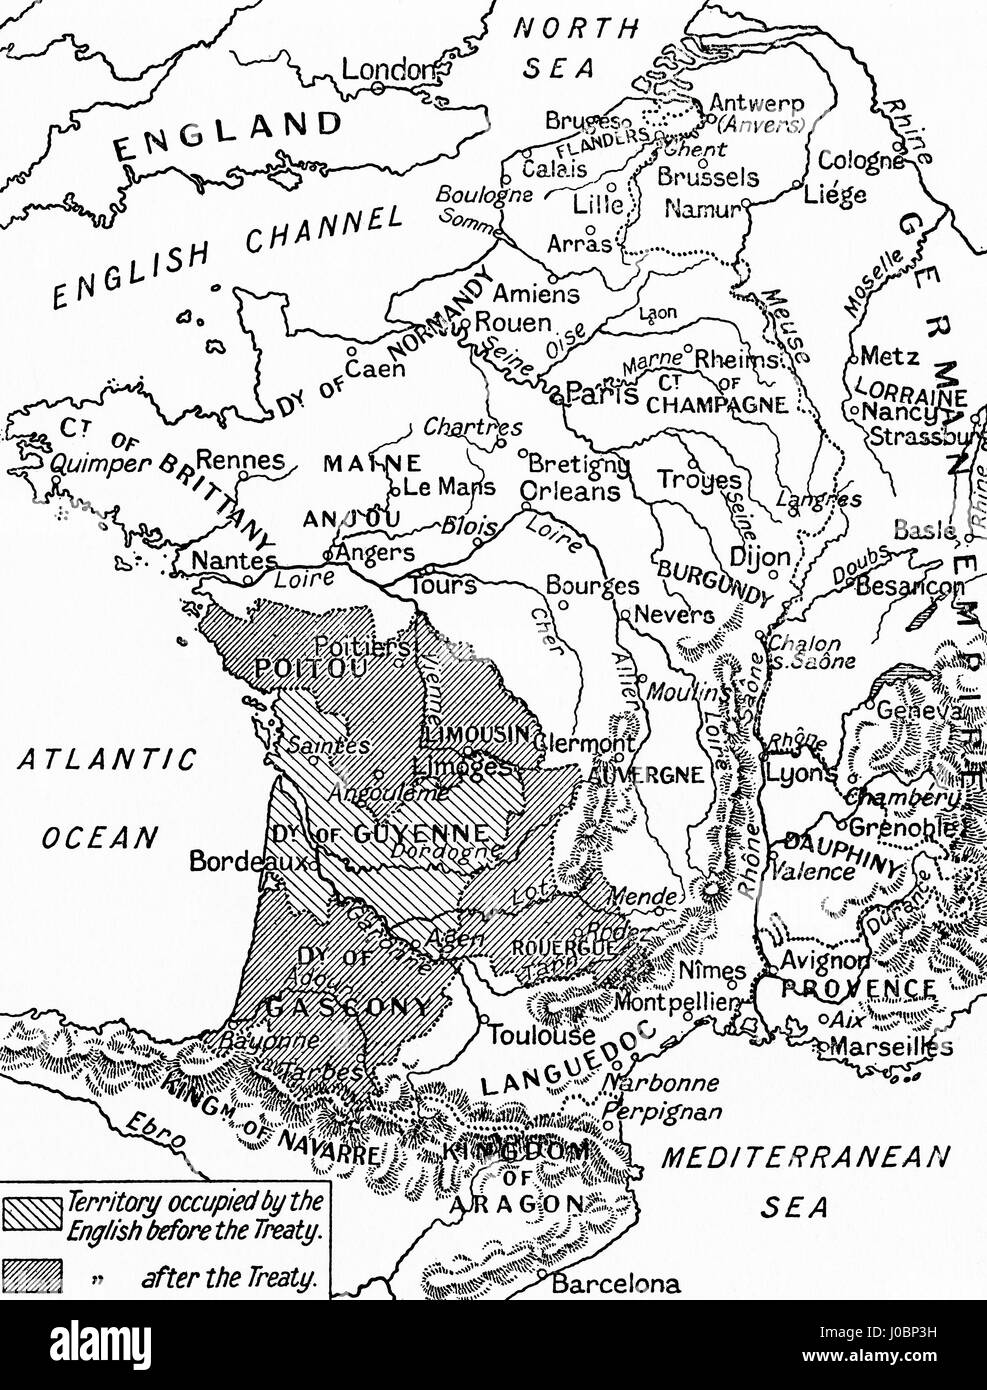 A map of France after the Treaty of Bretigny, 1360.  From Hutchinson's History of the Nations, published 1915. Stock Photo